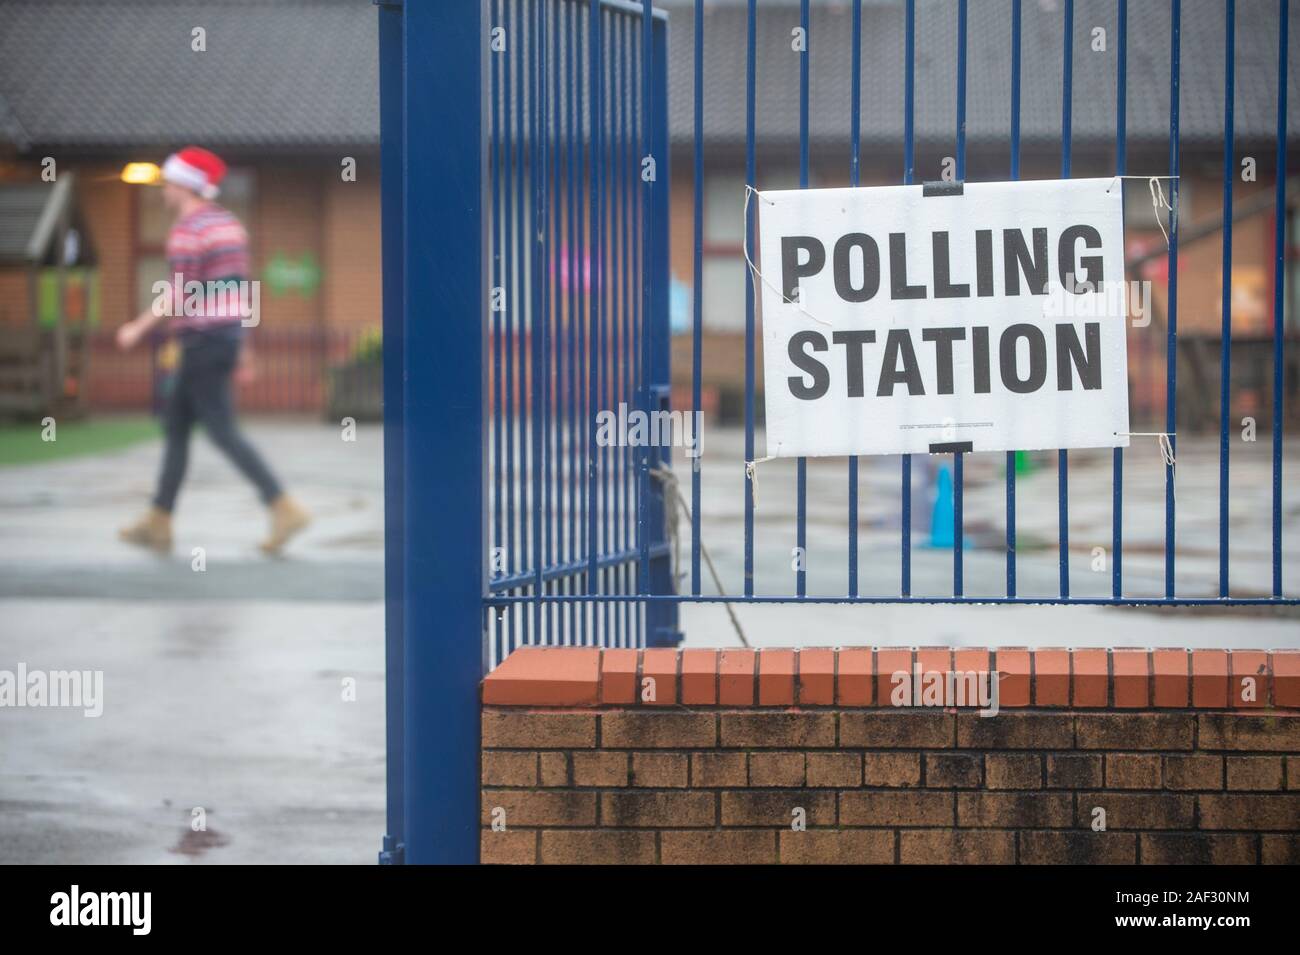 Stoke-on-Trent, UK. 12 December 2019. A voter takes a selfie outside a polling station while wearing a santa hat and christmas jumper in the rain. Stoke-on-Trent central is a key General Election battleground for both Labour and Conservatives. [EDITORIAL NOTE: Male shown in photograph did not provide name but consented to photo being used for editorial usage] Credit: Benjamin Wareing/ Alamy Live News Stock Photo